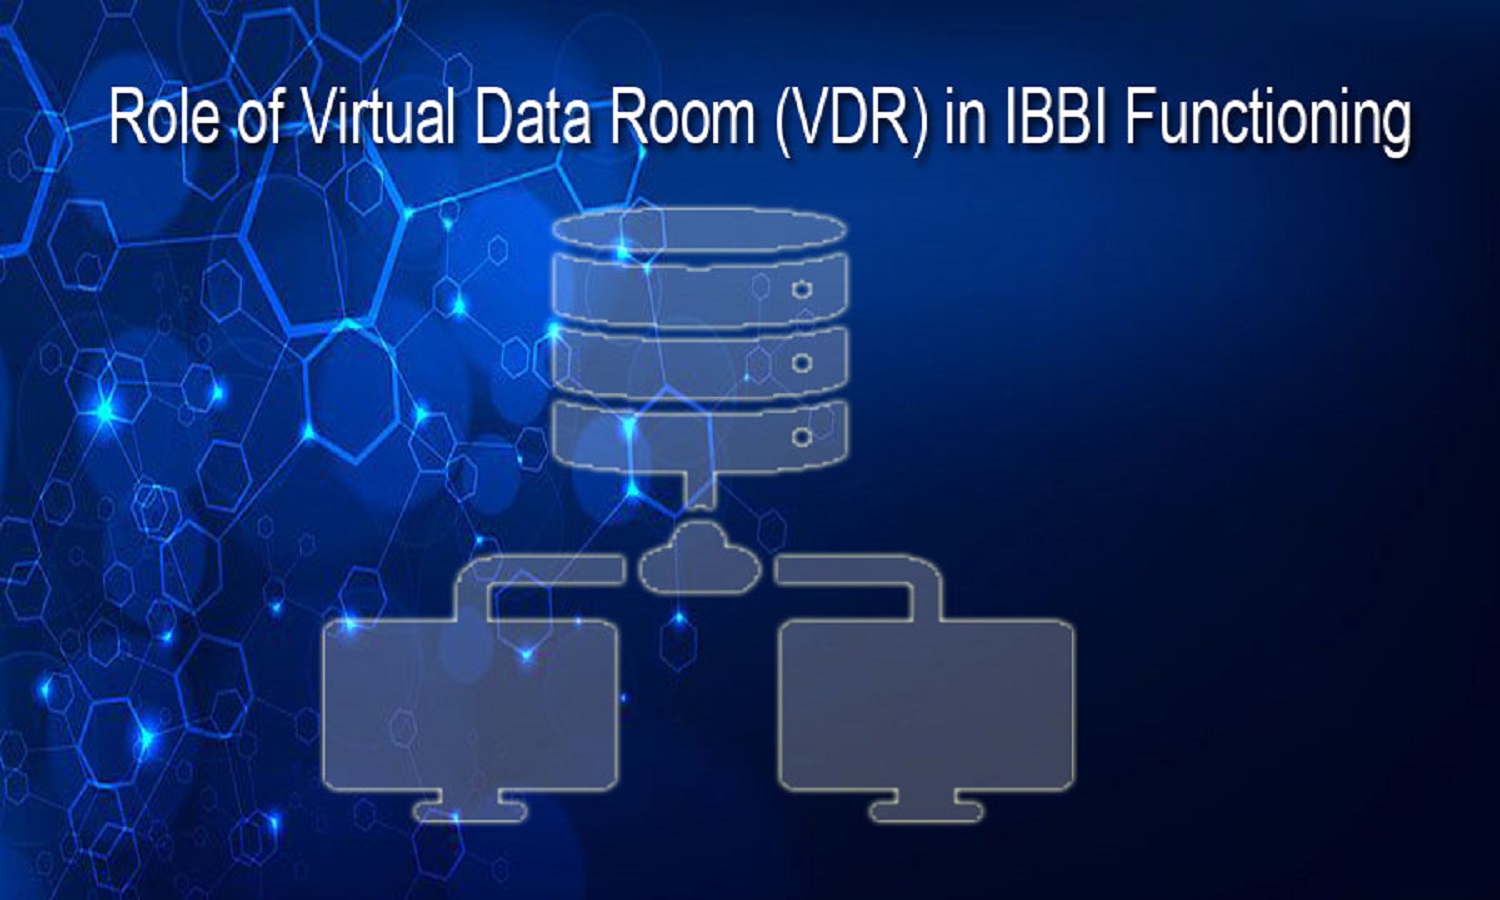 What is the Role of Virtual Data Room for IBBI?